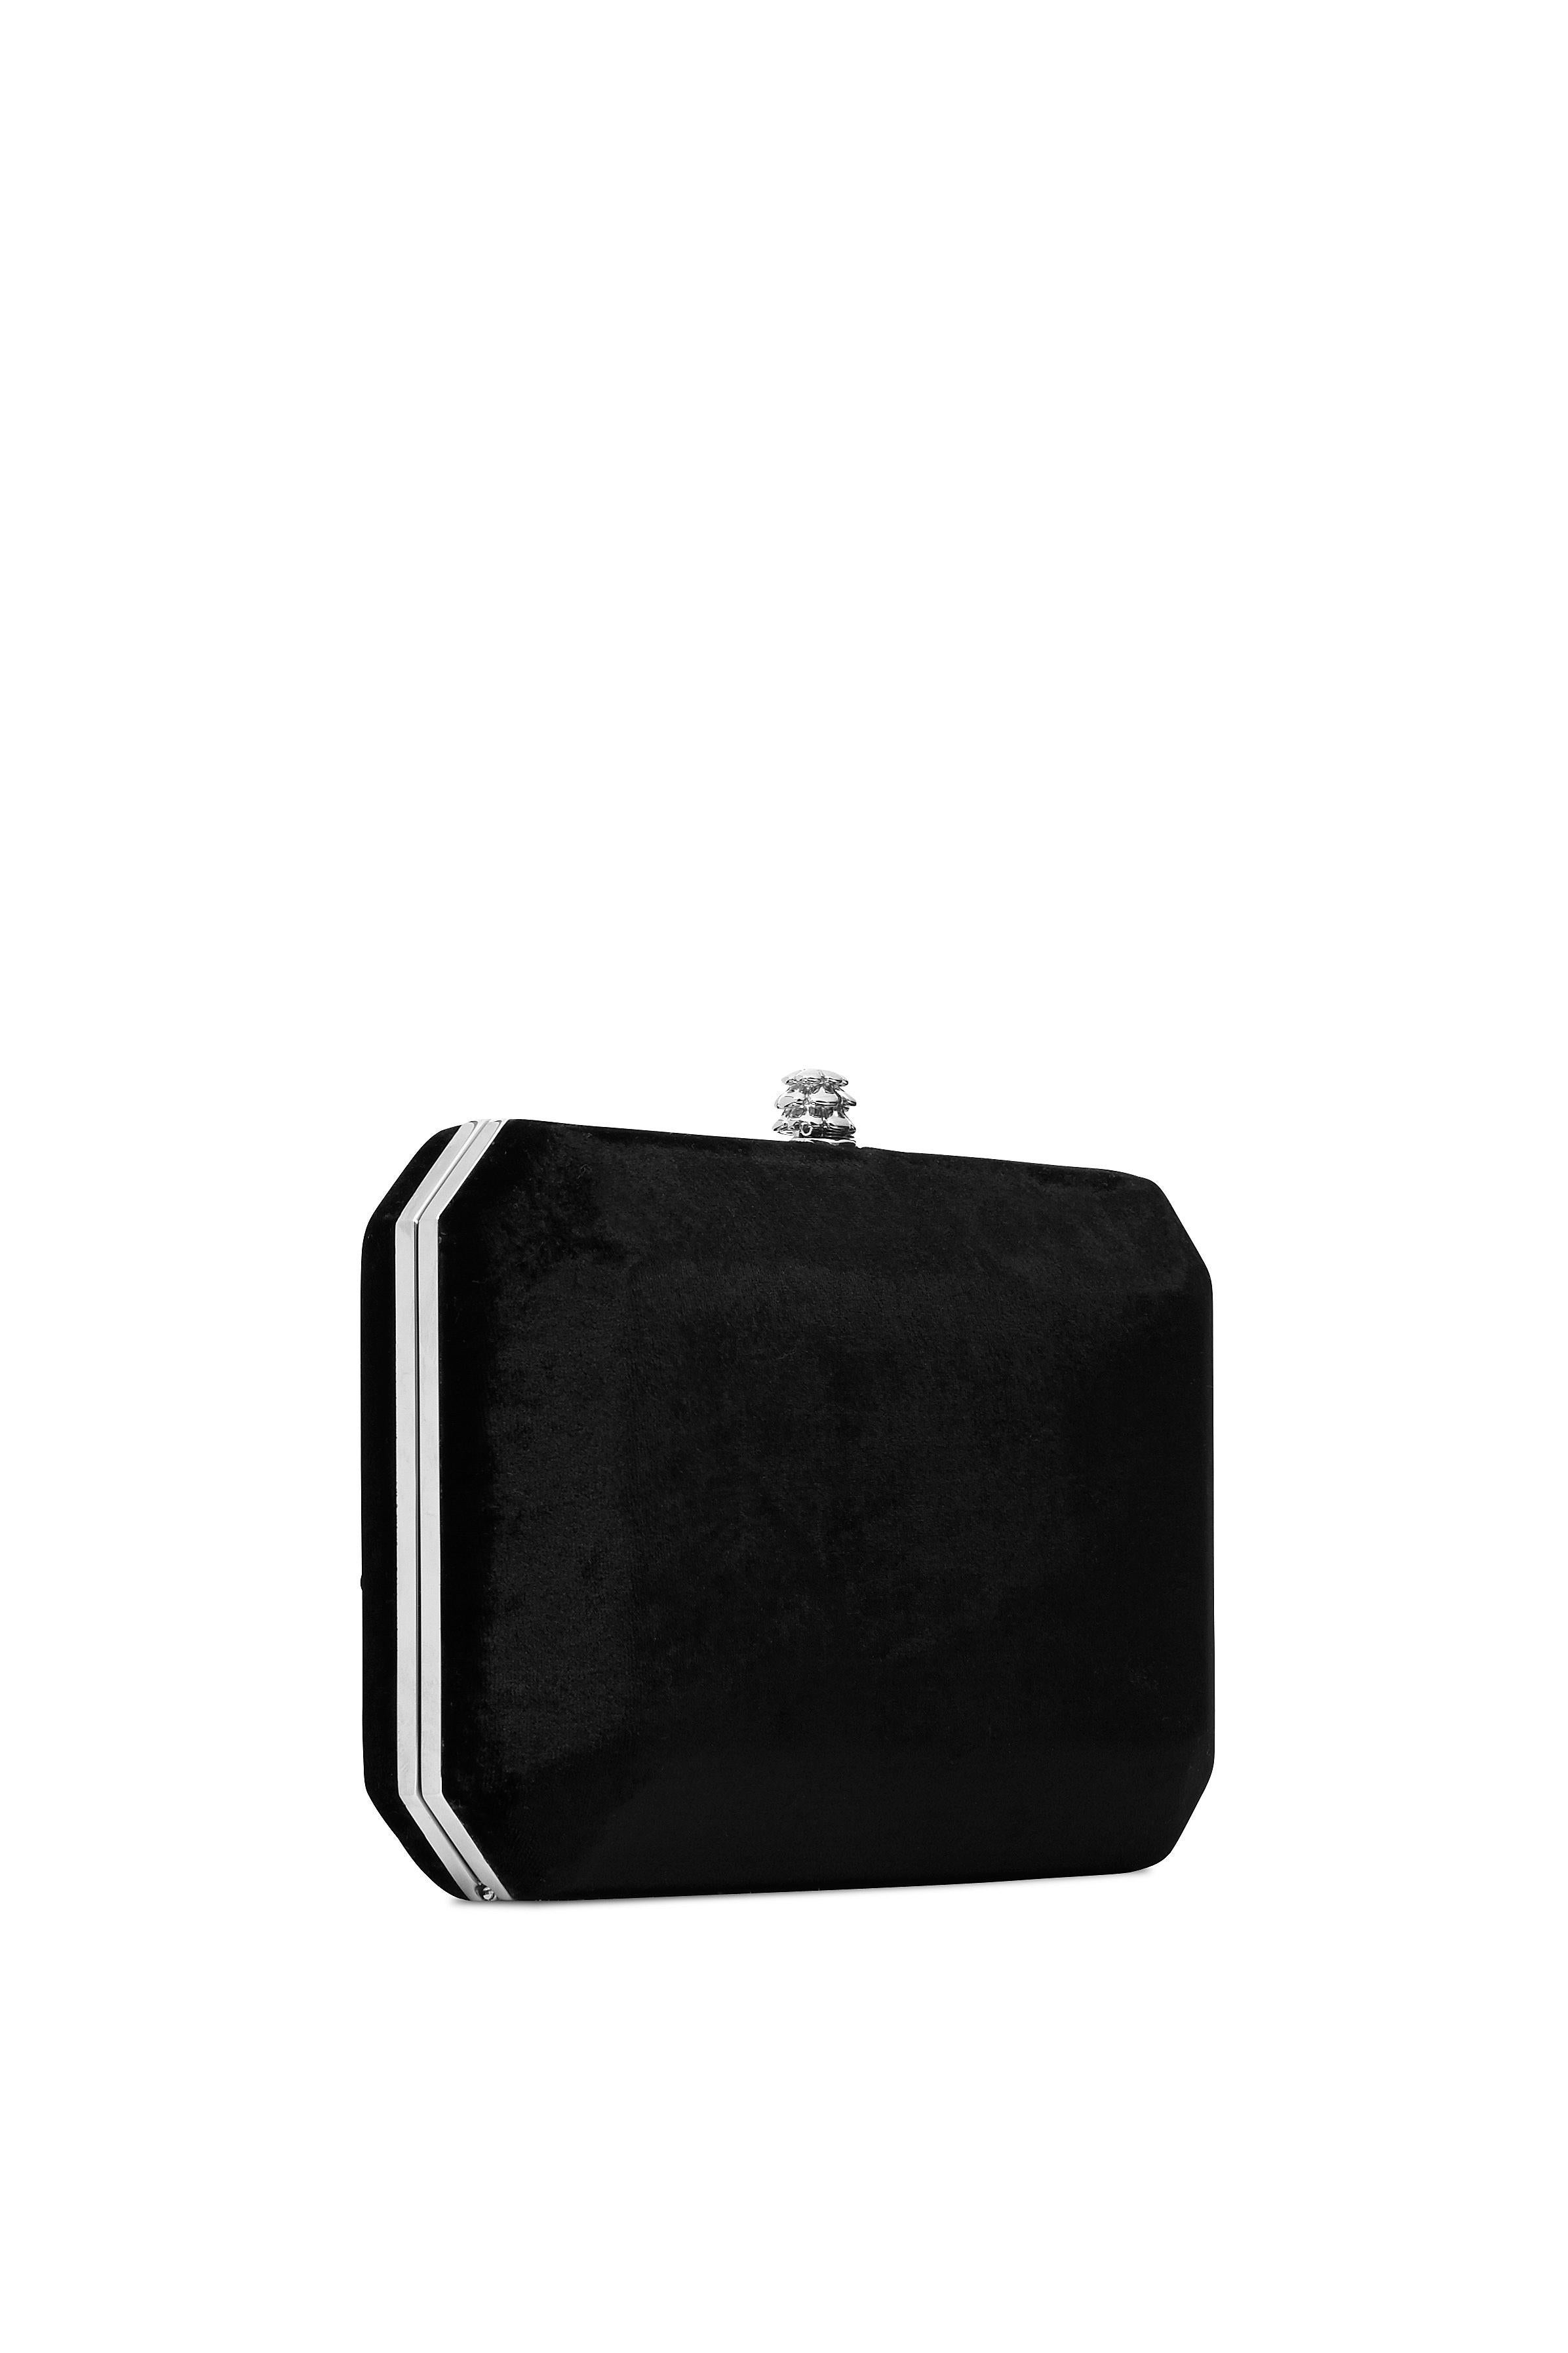 black clutch with silver hardware